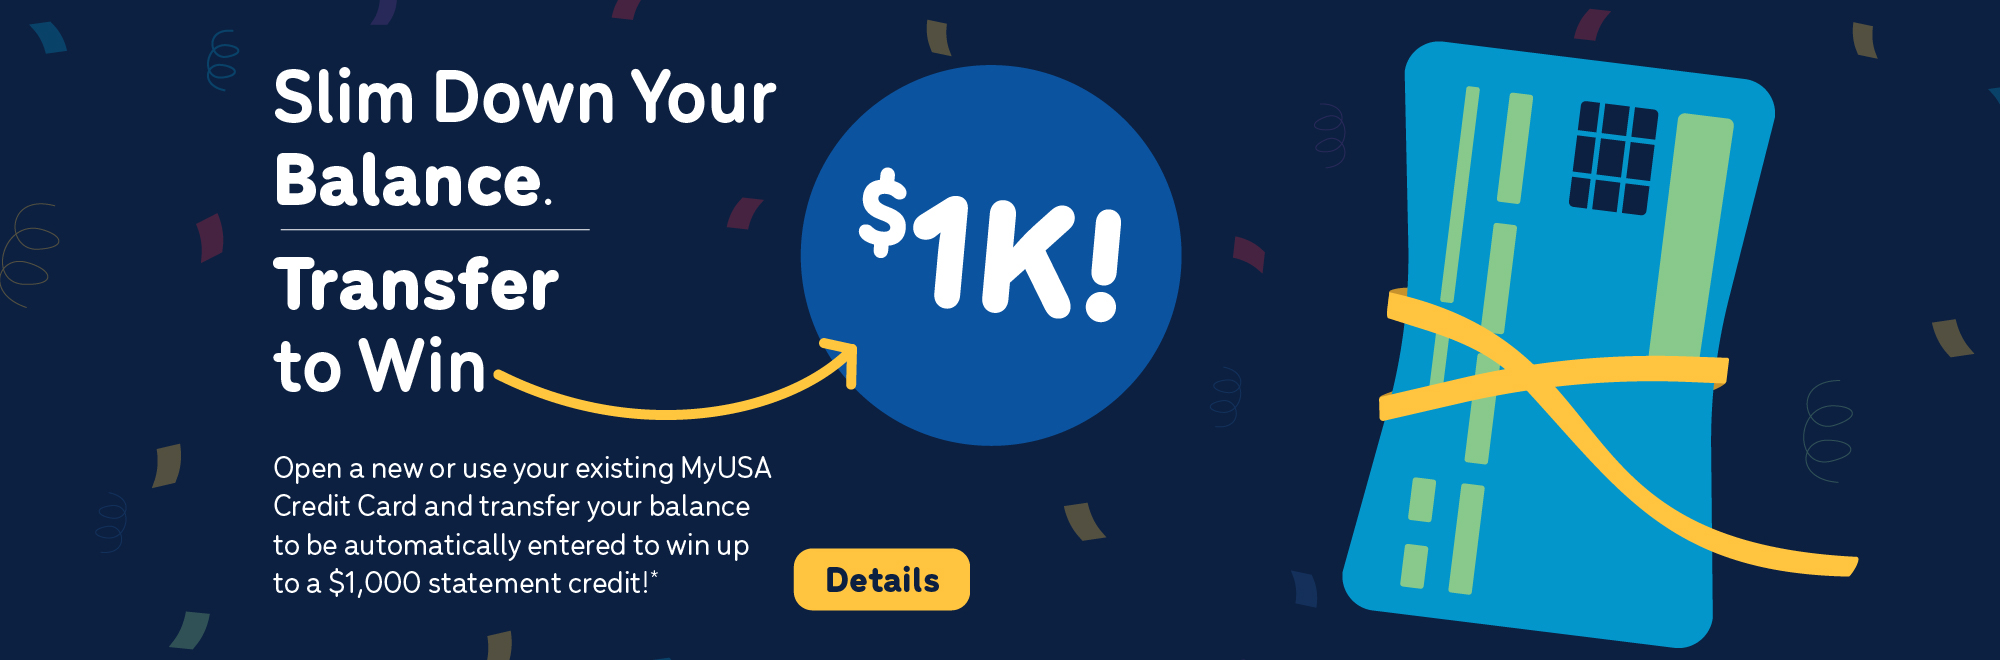 Slim Down Your Balance and Enter to Win up to $1k!